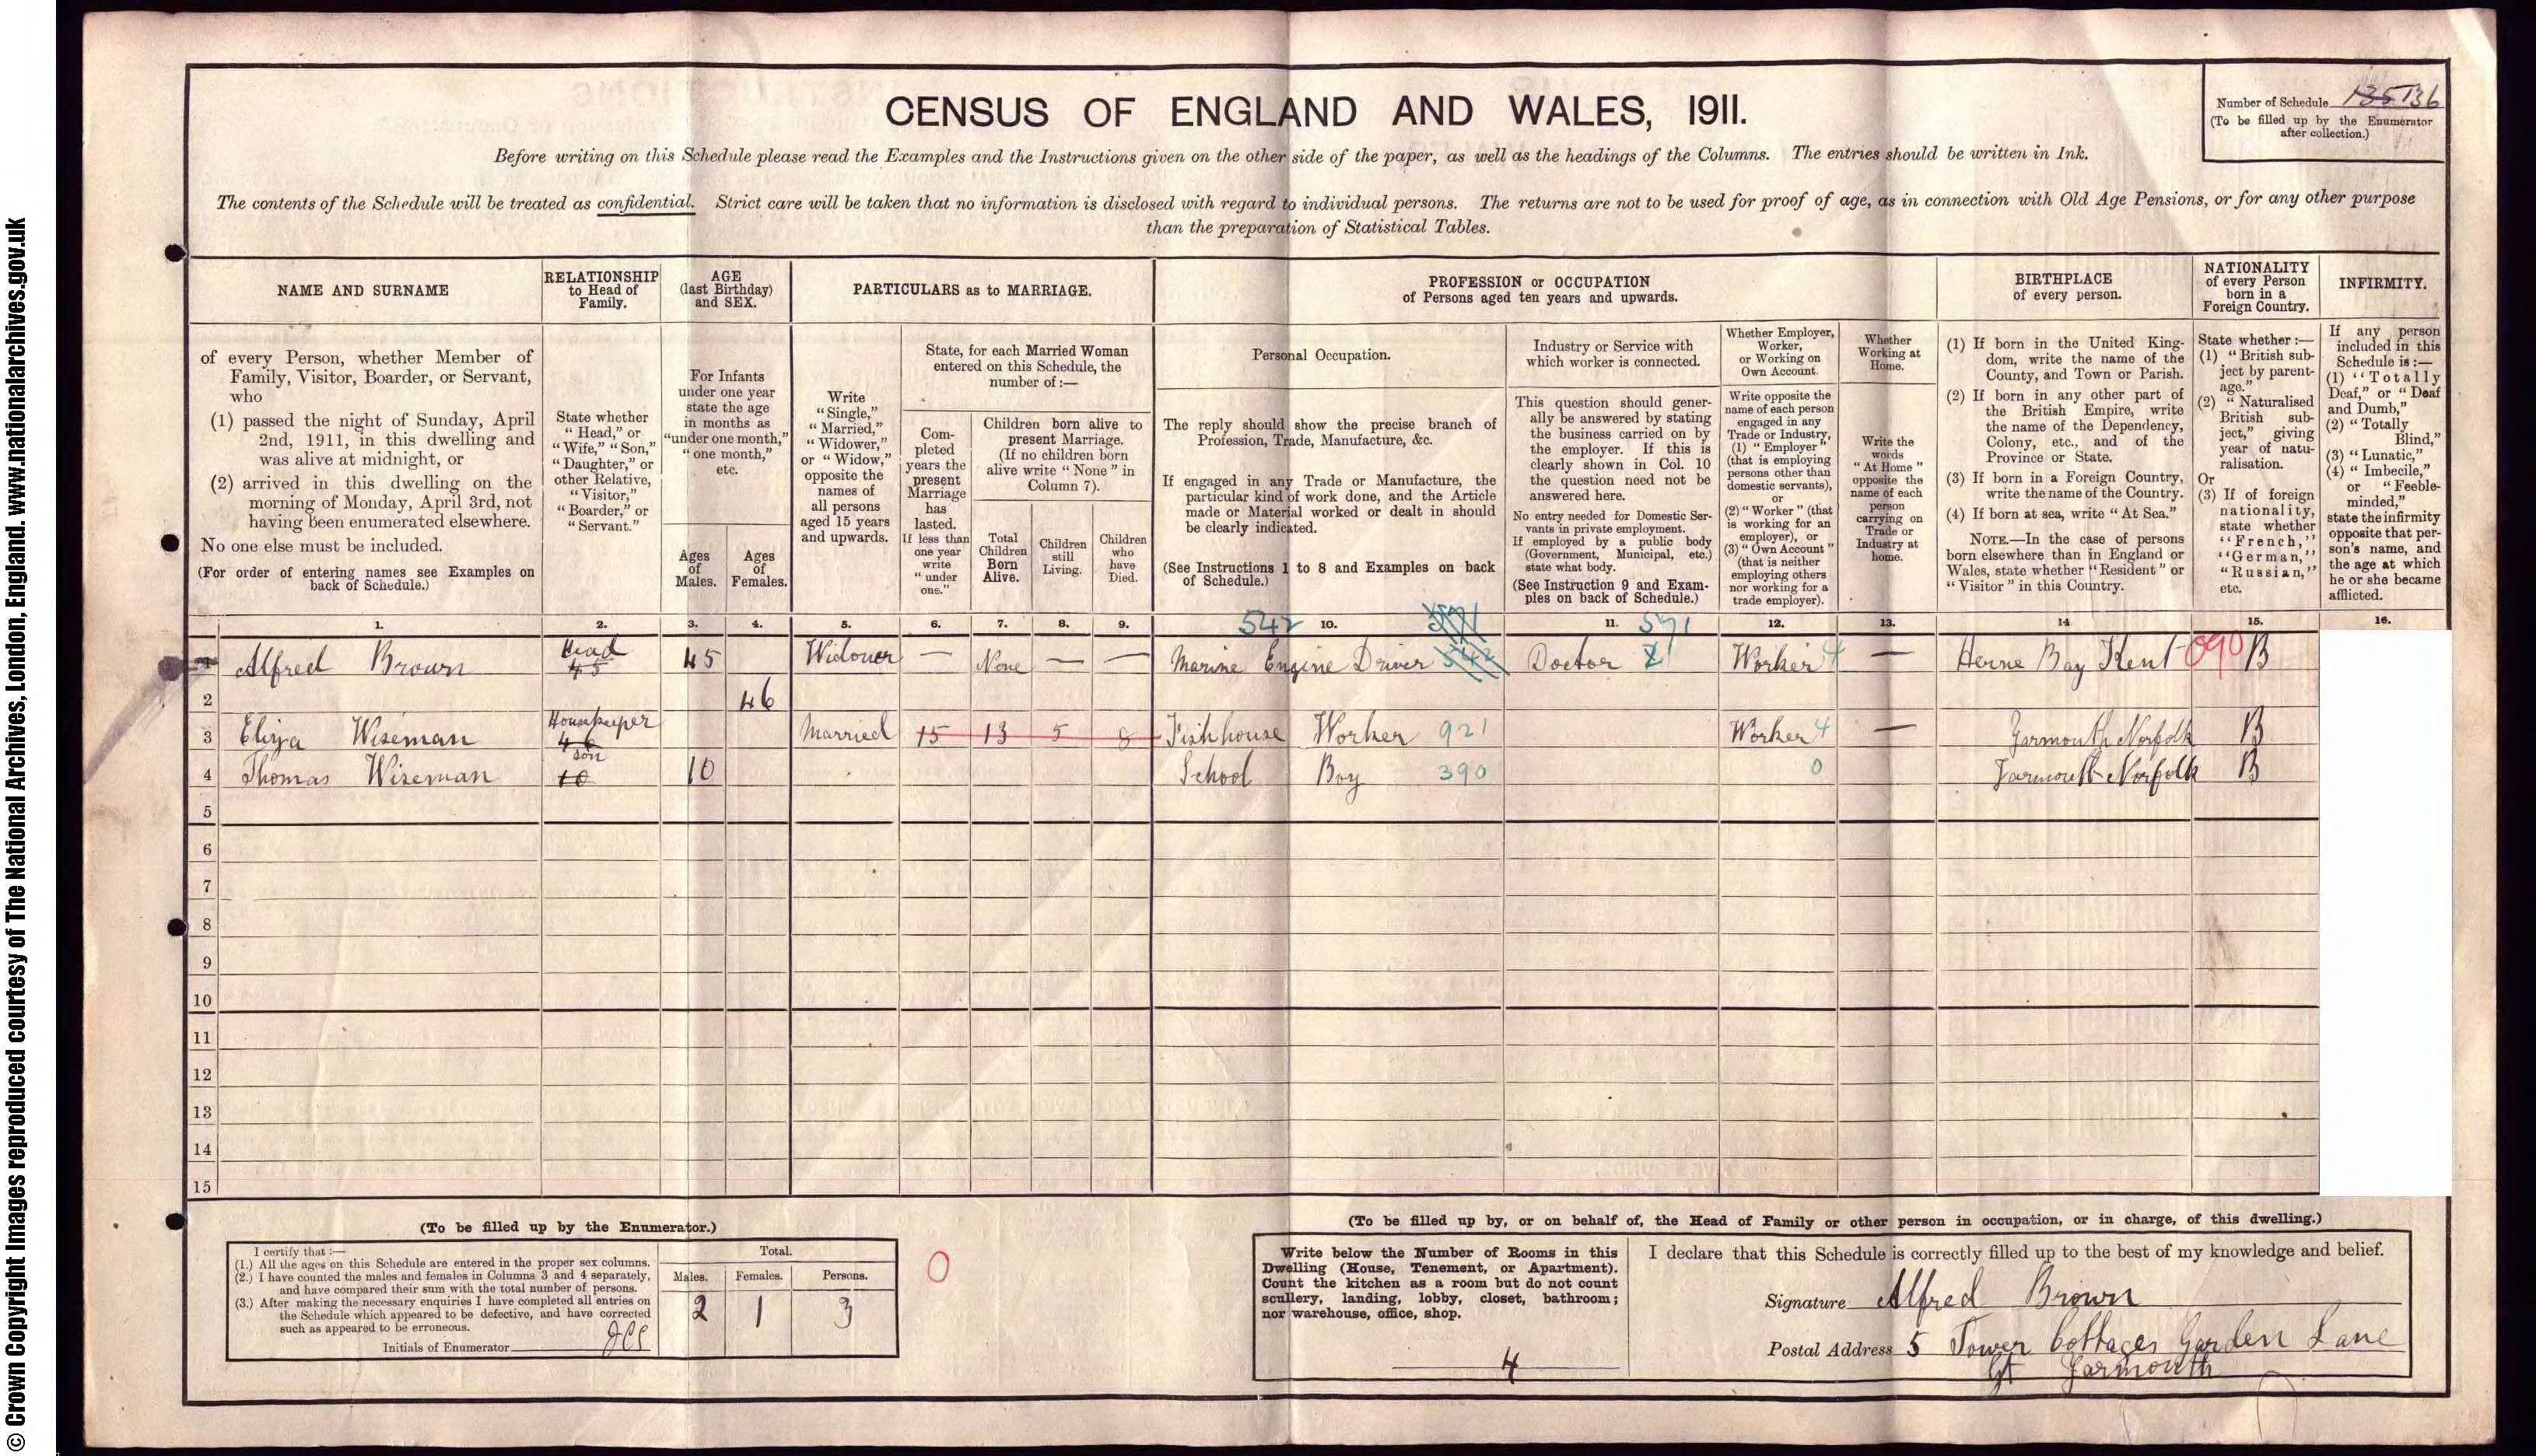  - 5230_1_alfred_brown_in_yarmouth_1911census-rg14-11-0-73-11073_0271_03